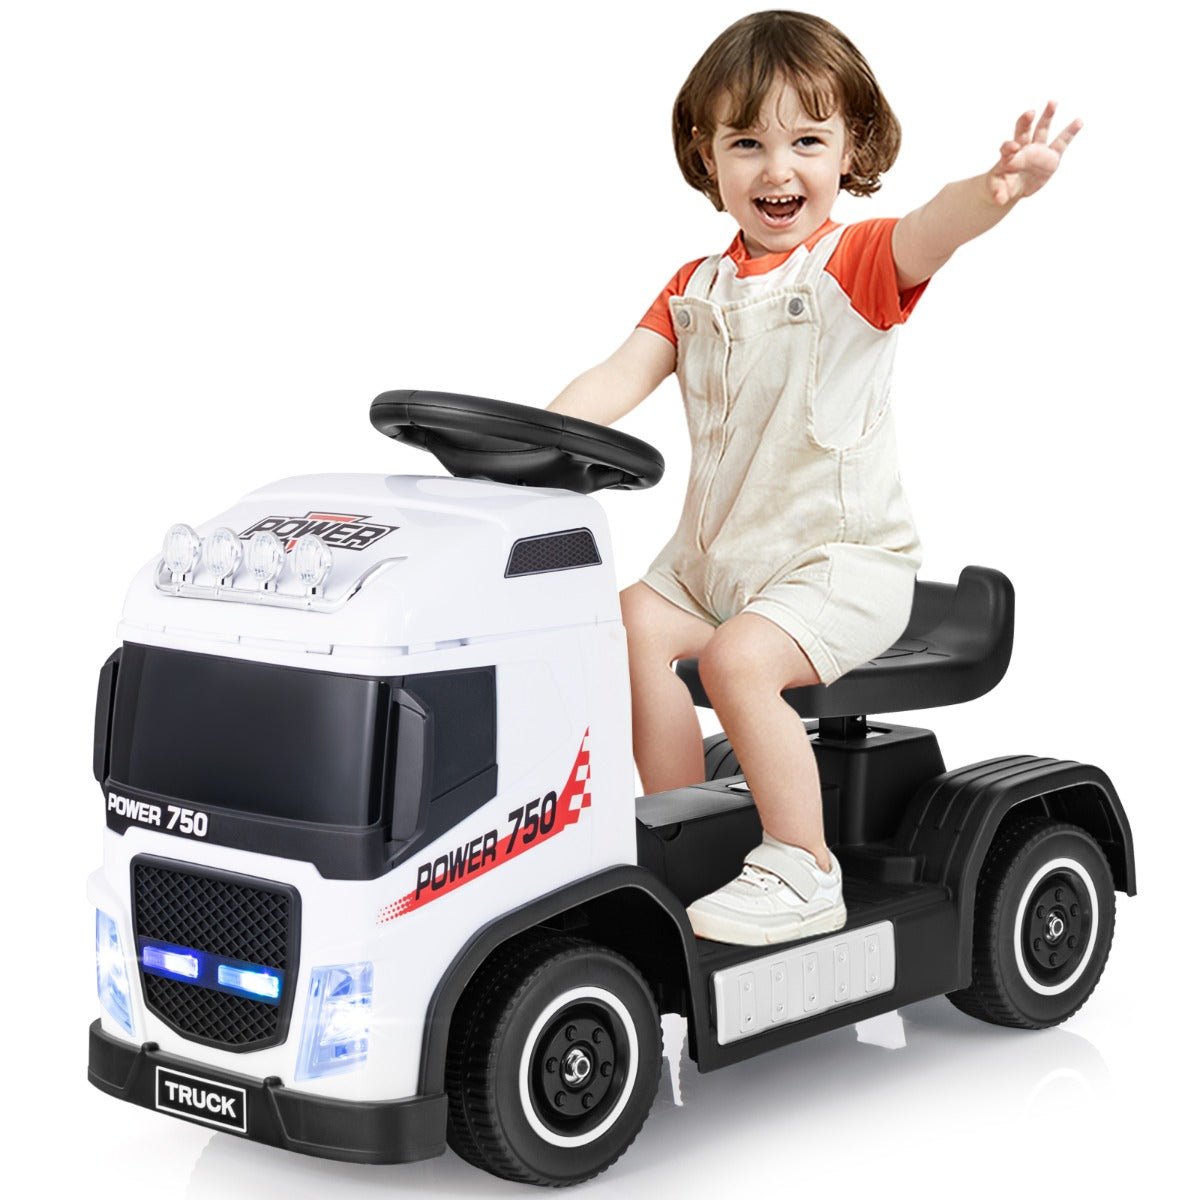 Playtime Tunes Ride-On Vehicle